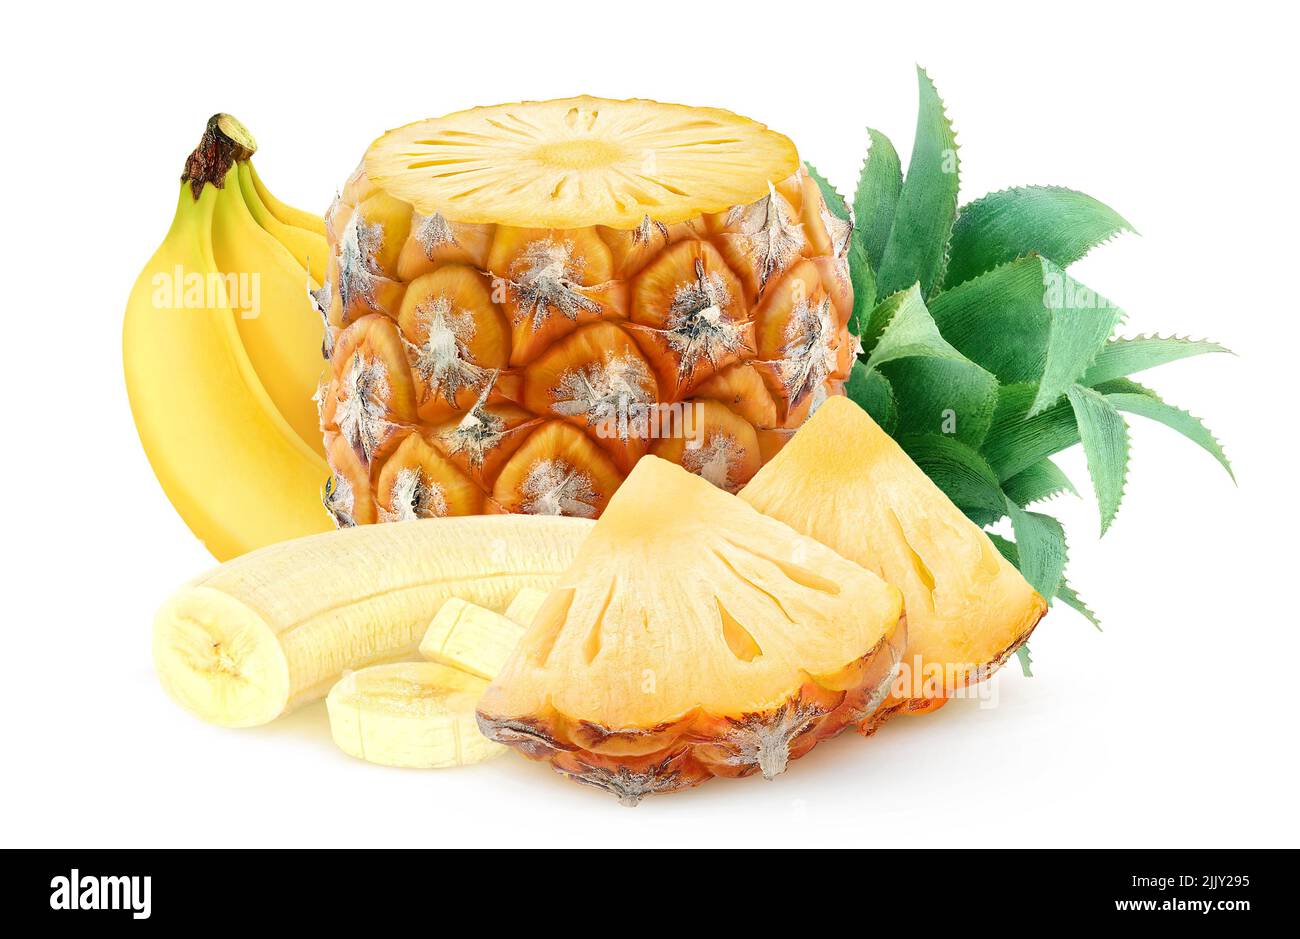 Cut banana and pineapple fruits isolated on white background Stock Photo